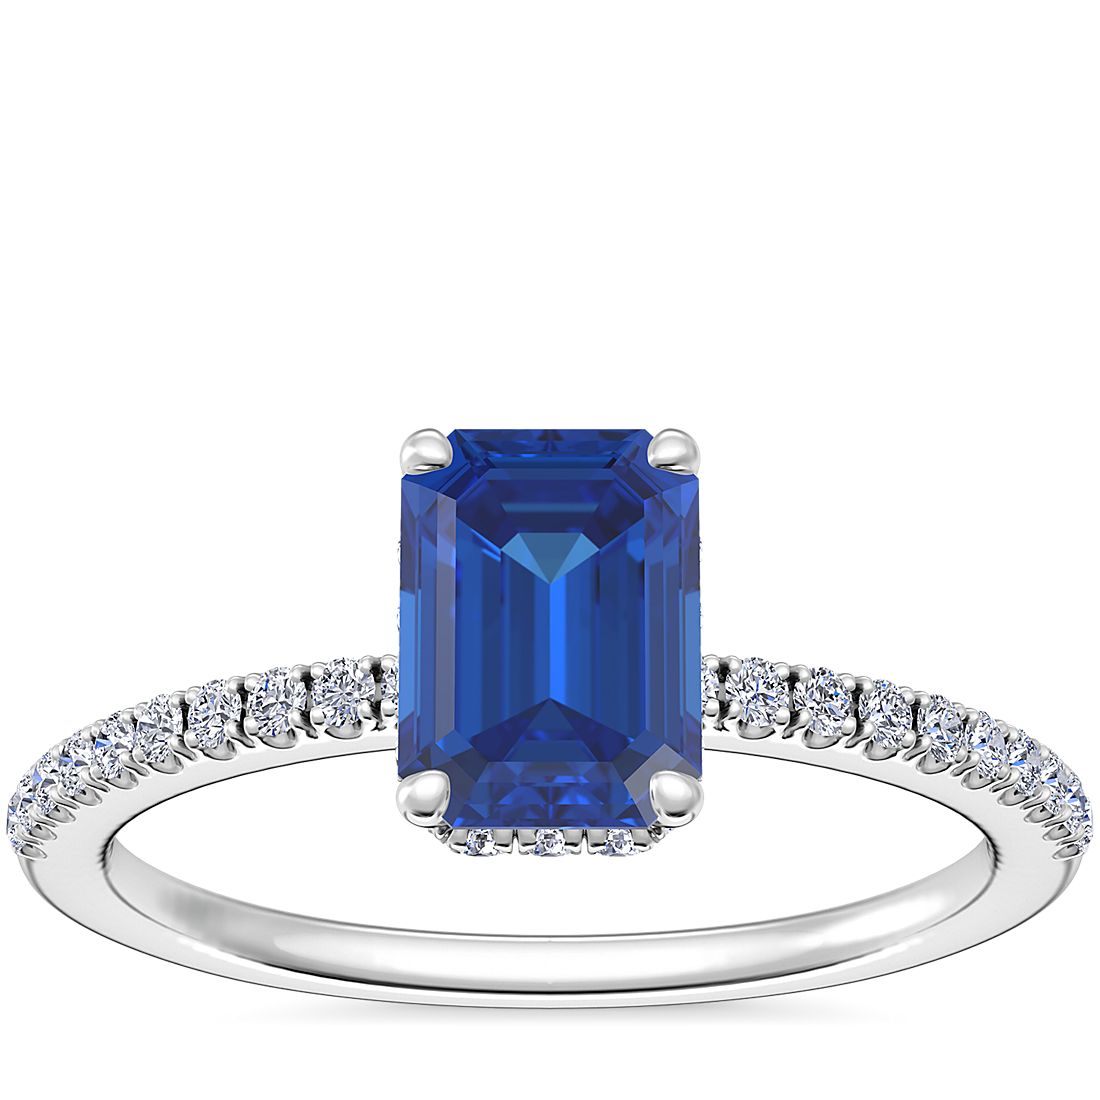 Petite Micropavé Hidden Halo Engagement Ring with Emerald-Cut Sapphire in Platinum (7x5mm)